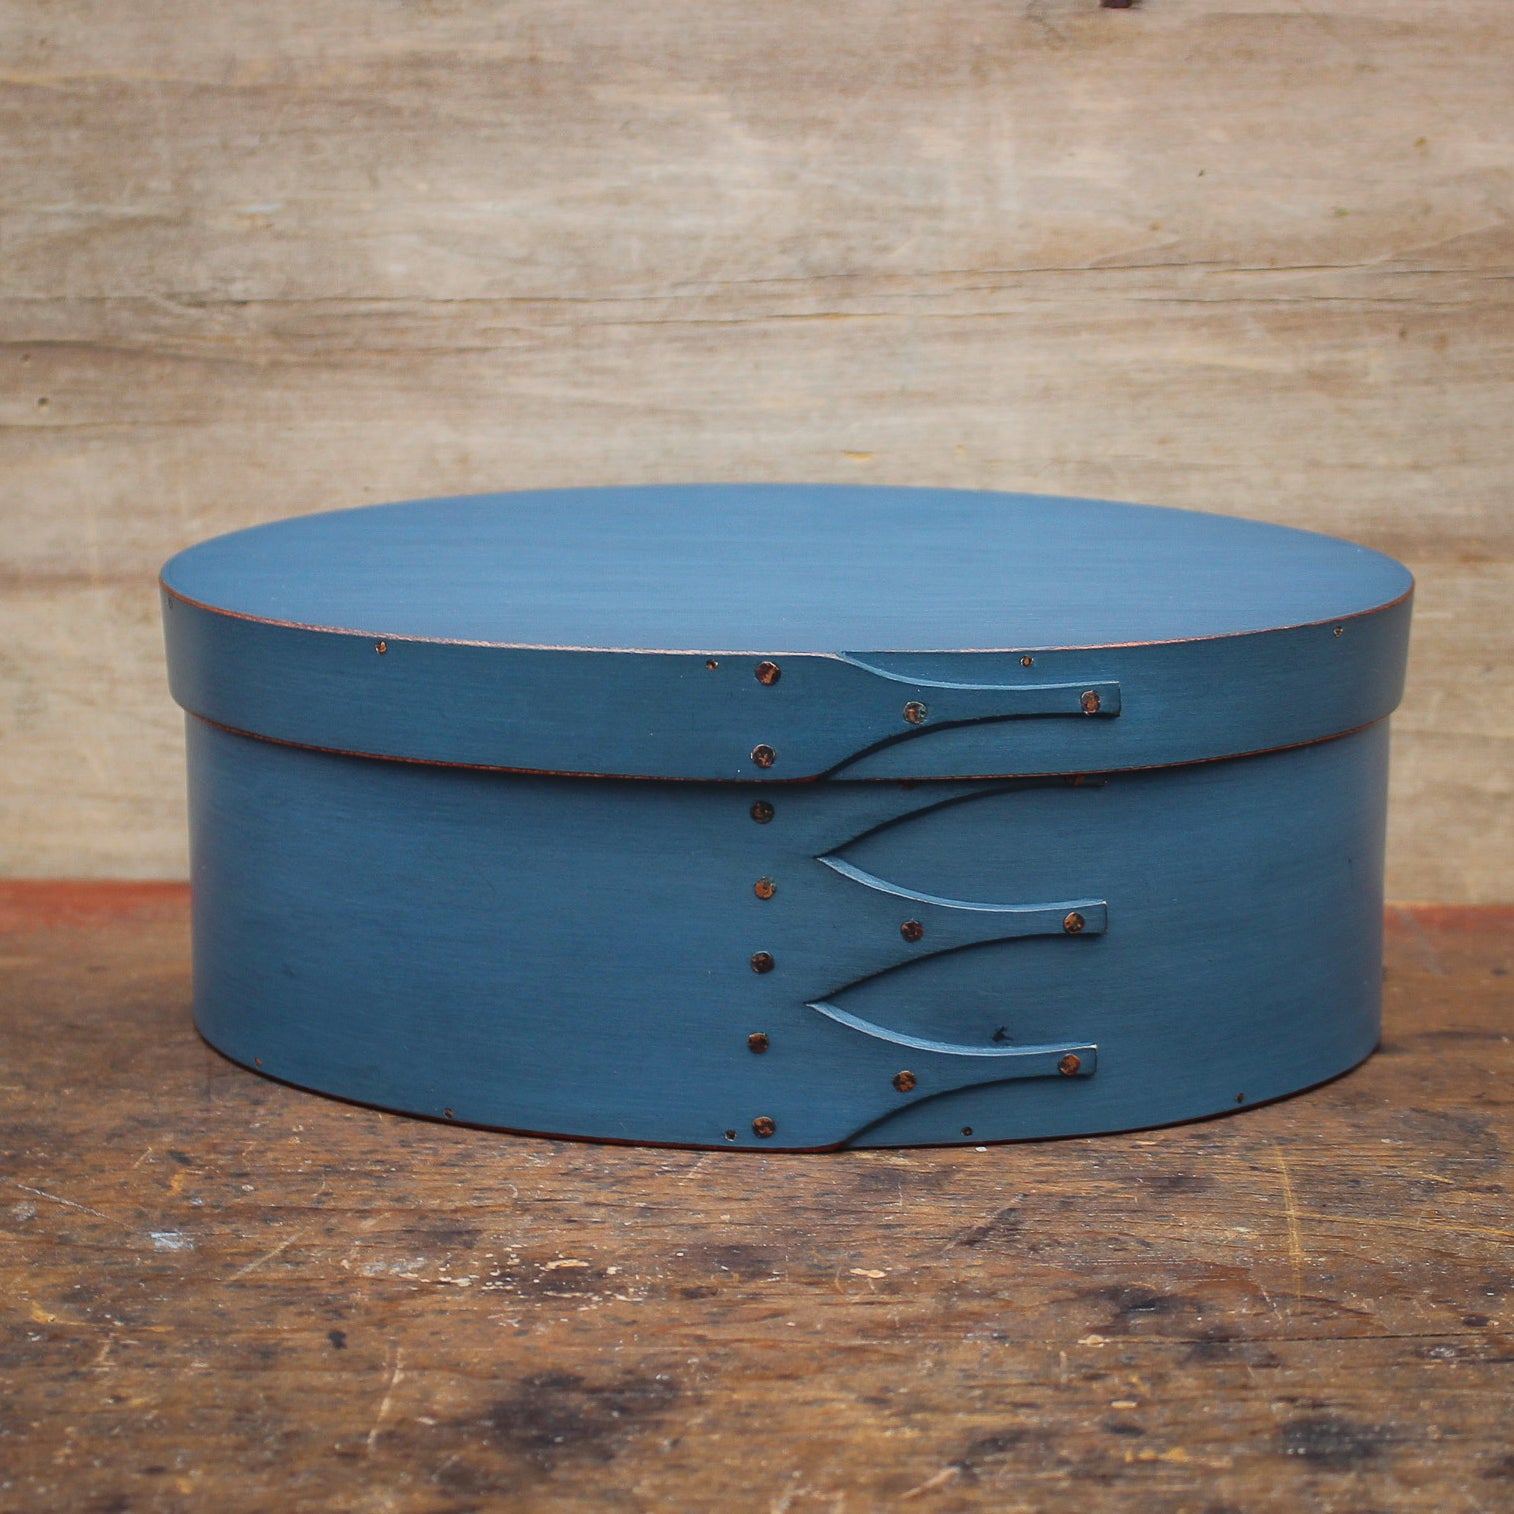 Shaker Oval Box, Size #4, LeHays Shaker Boxes, Handcrafted in Maine. Blue Milk Paint Finish, Front View